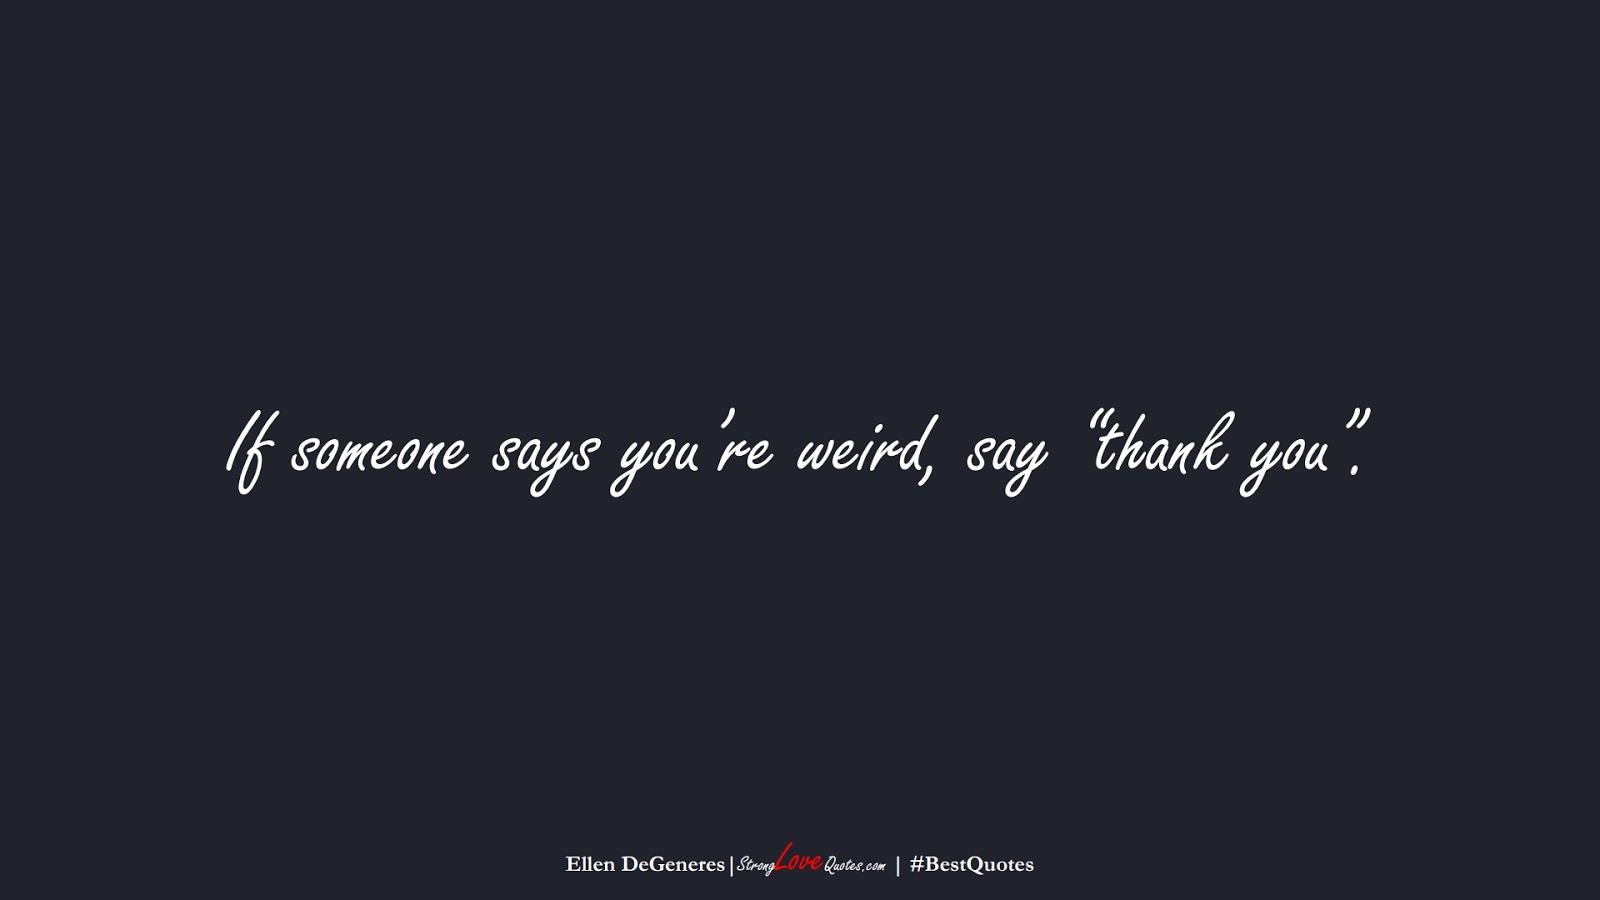 If someone says you’re weird, say “thank you”. (Ellen DeGeneres);  #BestQuotes